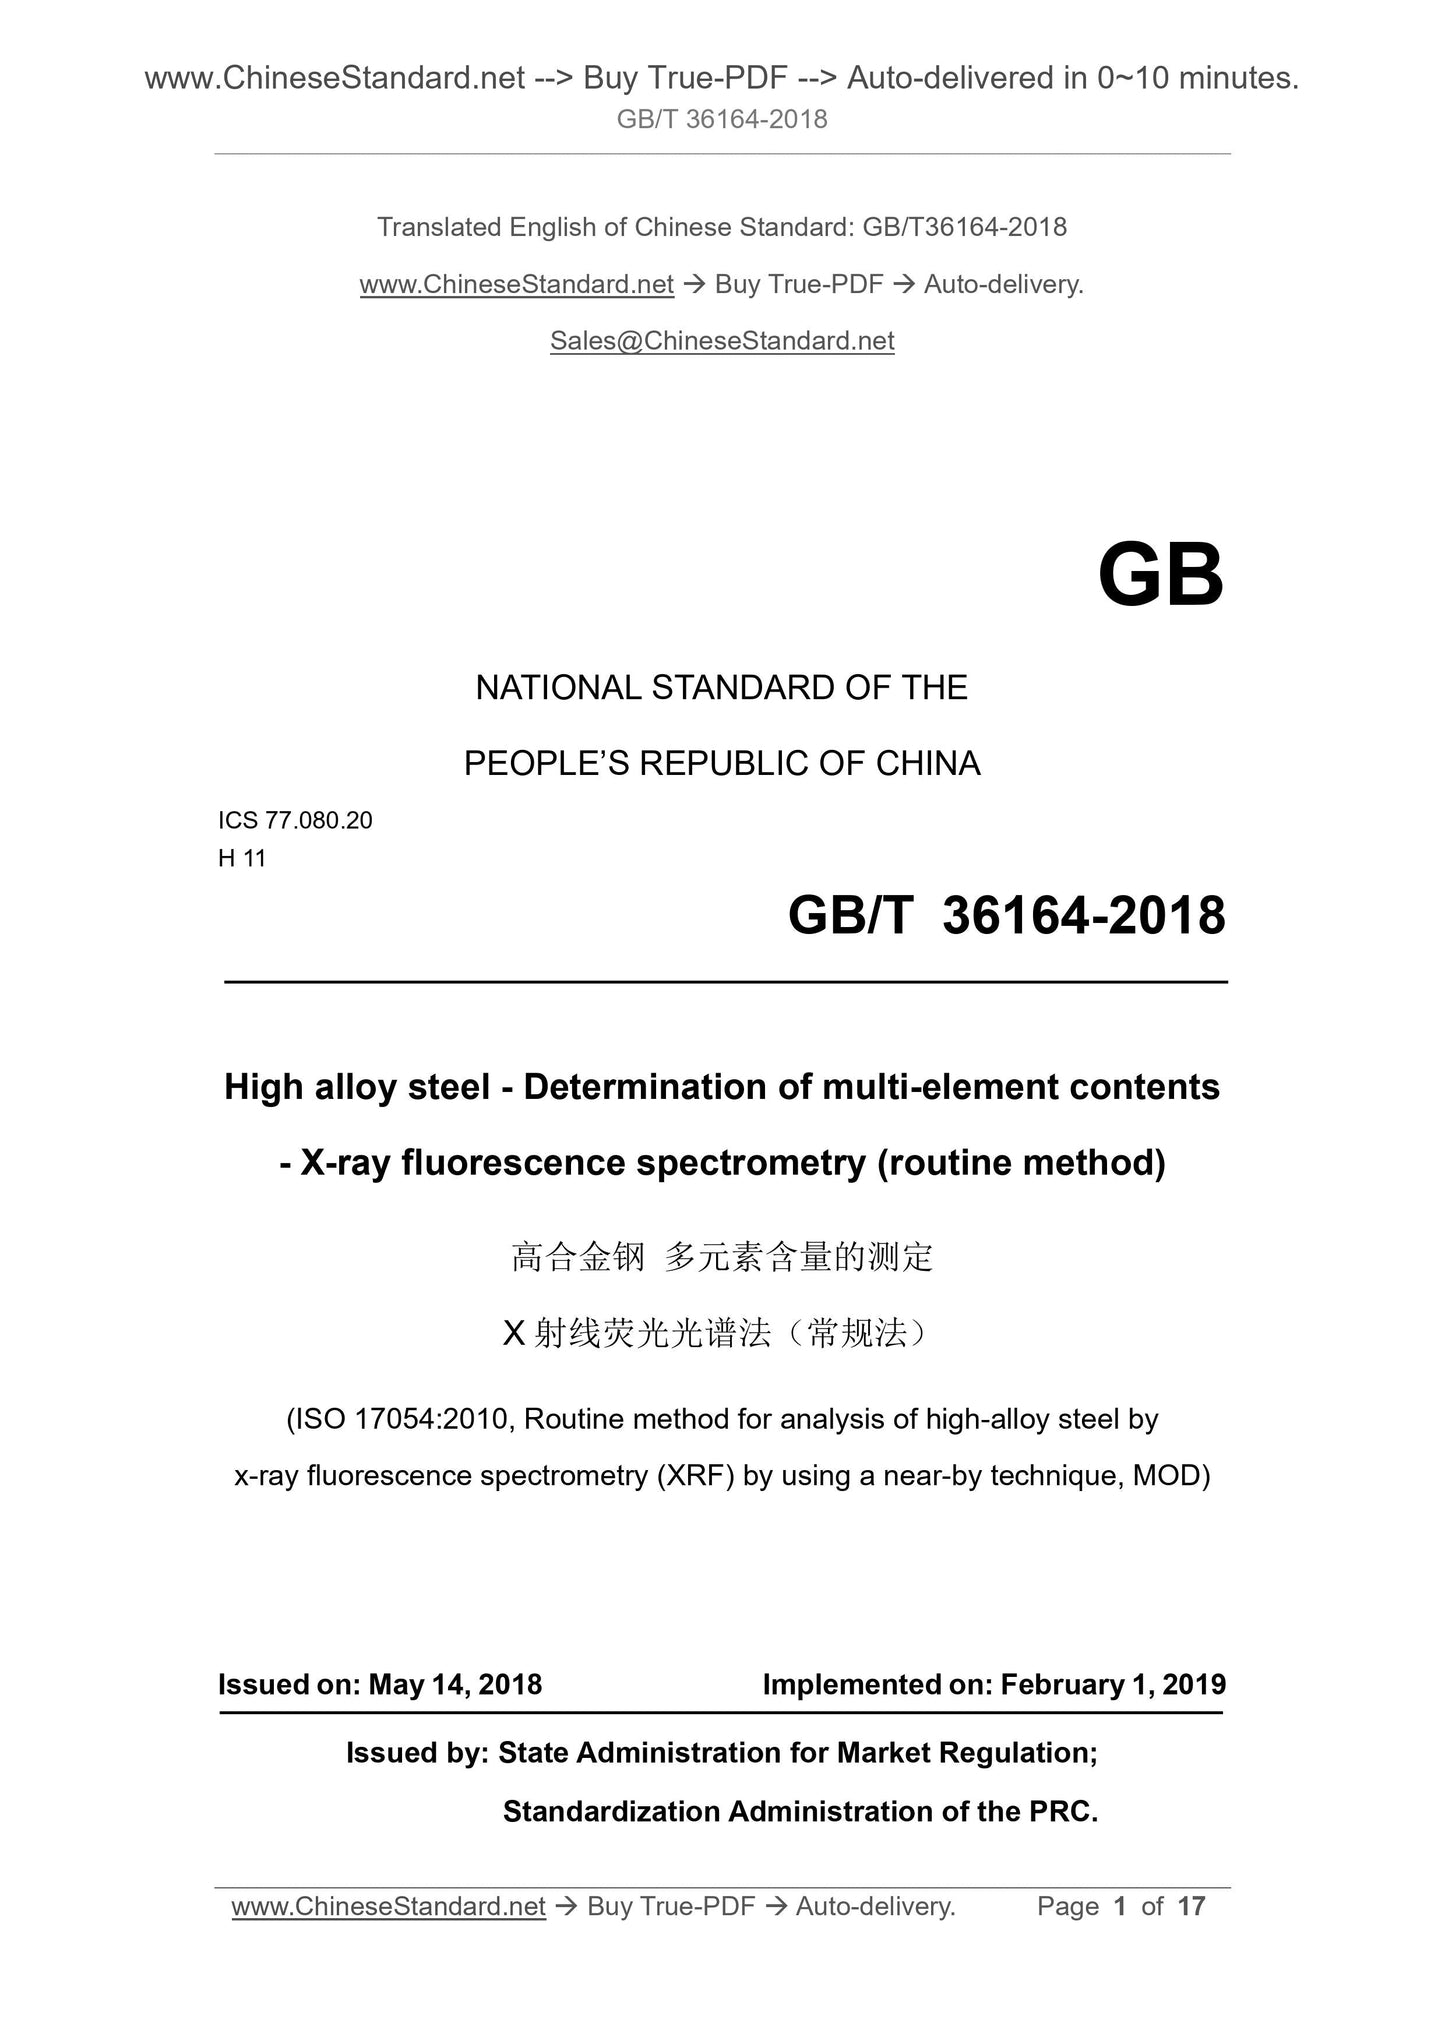 GB/T 36164-2018 Page 1